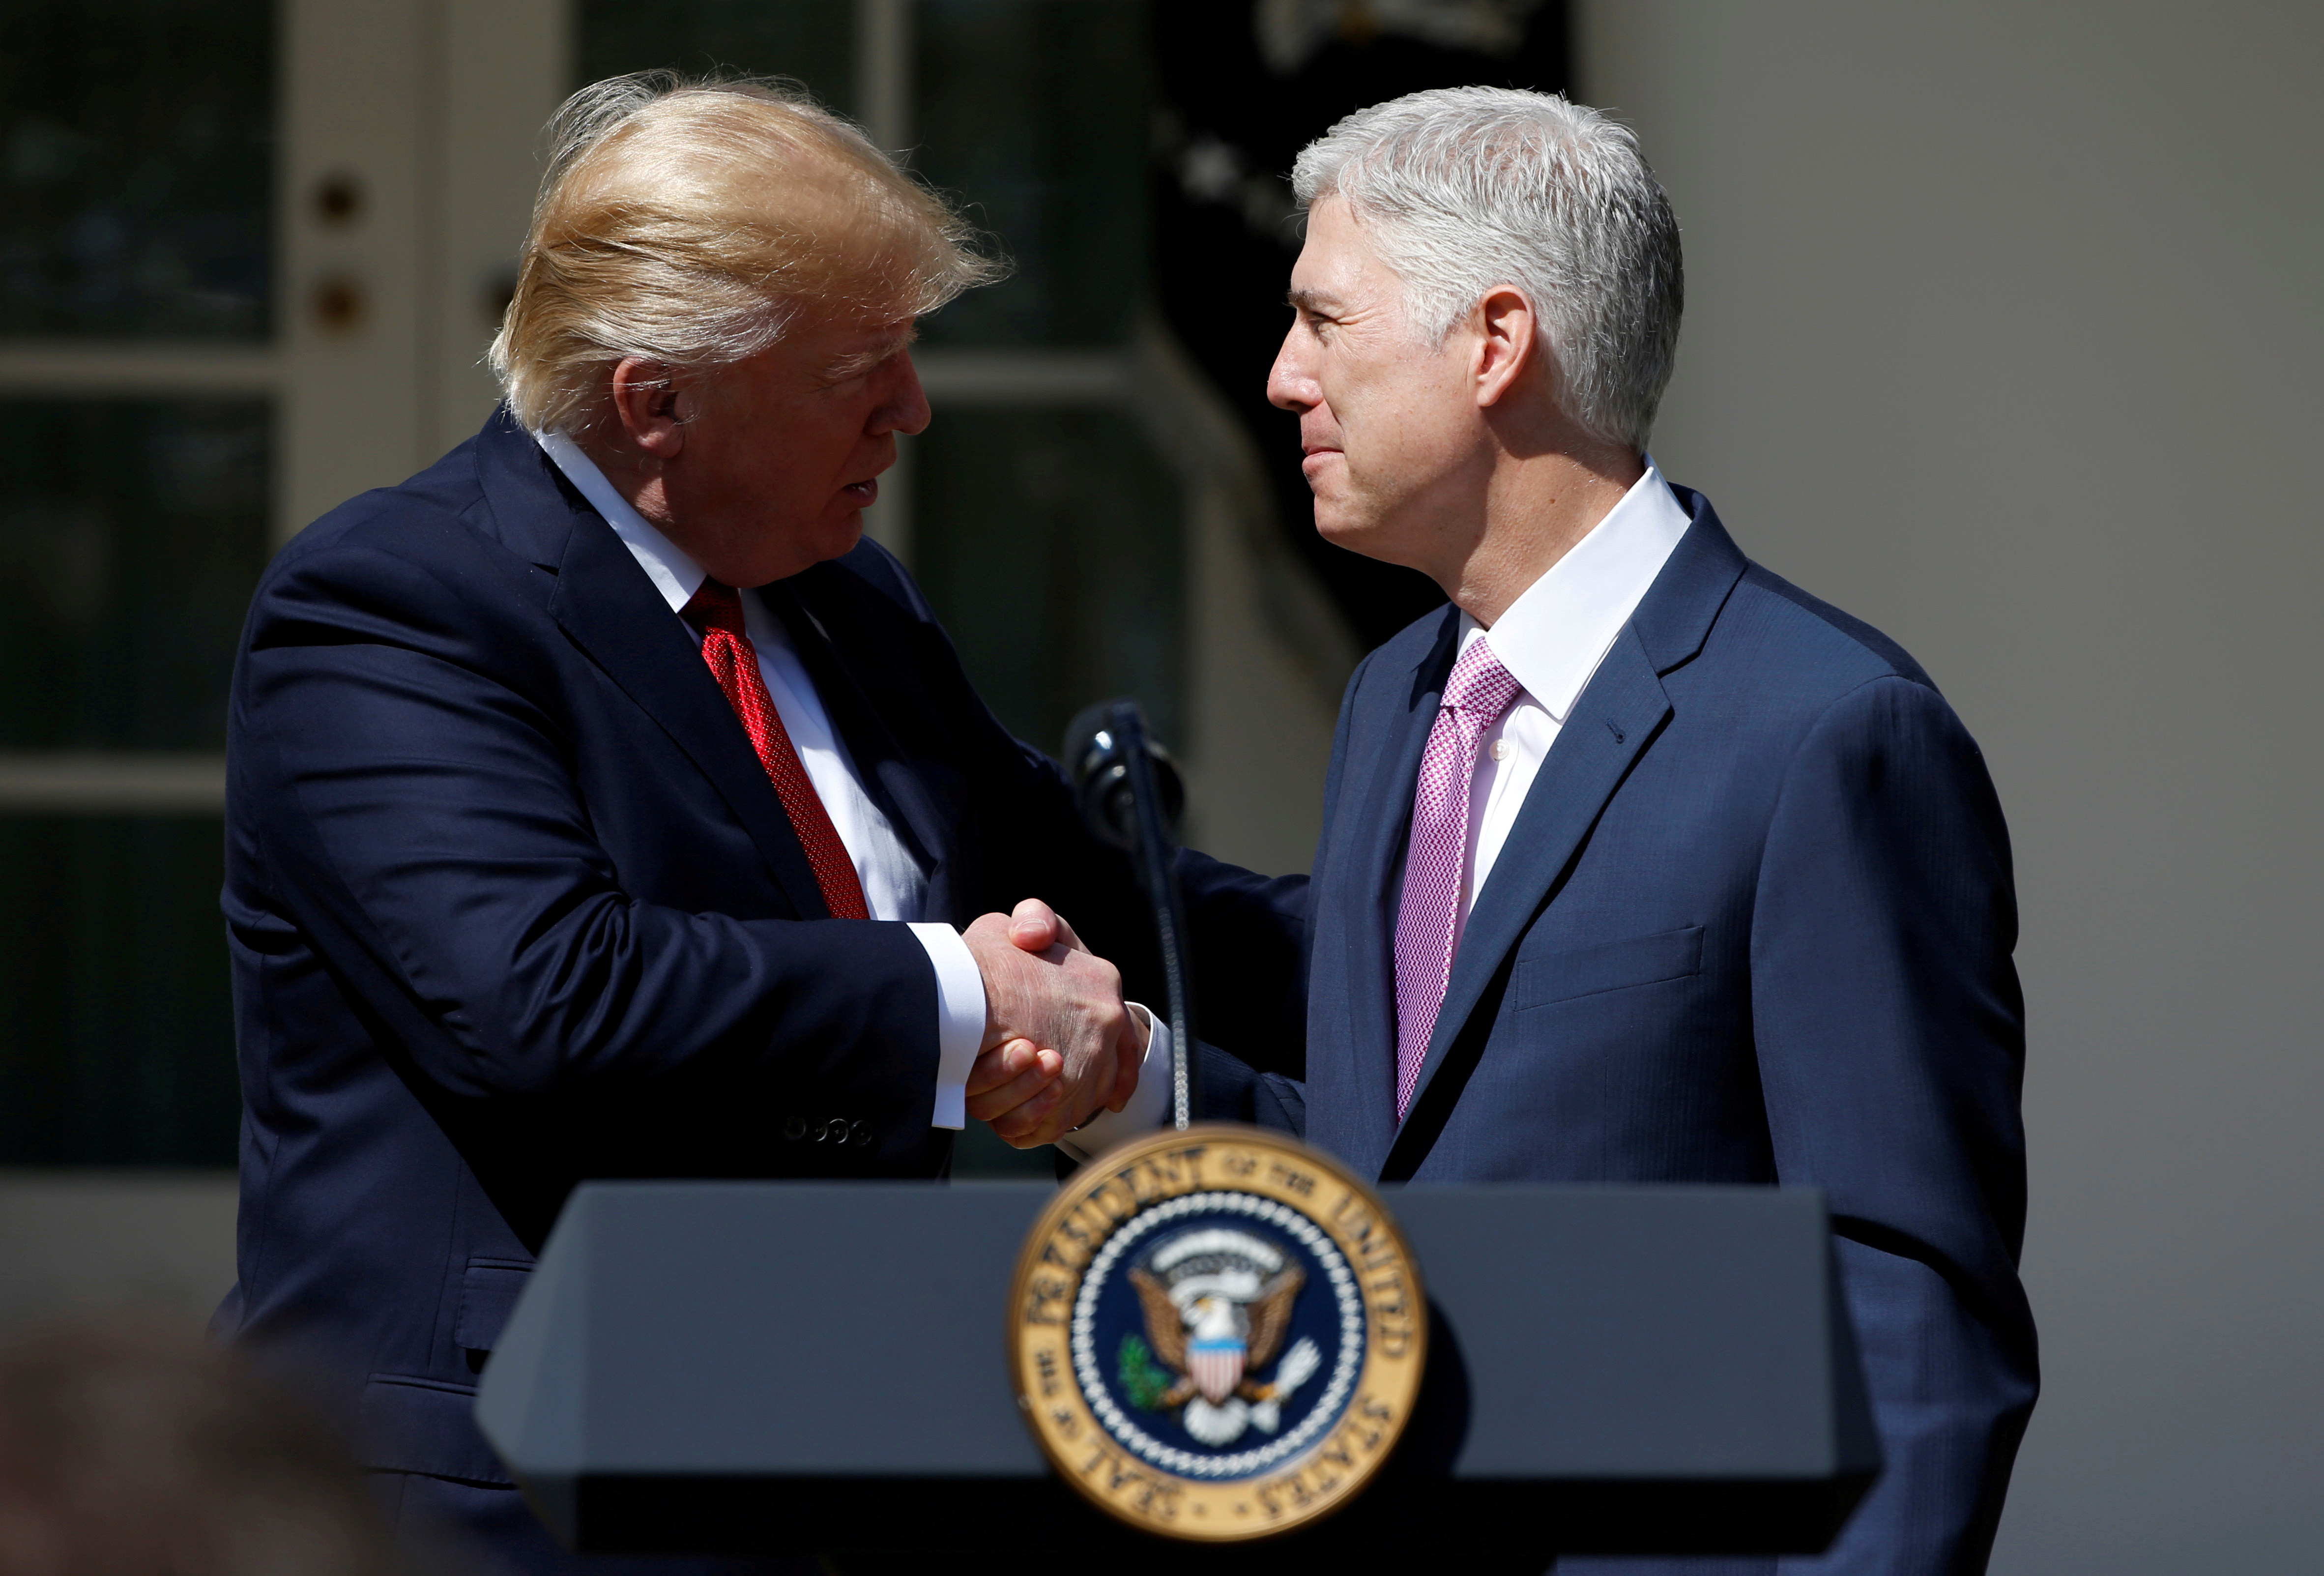 U.S. President Donald Trump shakes hands with Judge Neil Gorsuch after he was sworn in as an Associate Supreme Court in the Rose Garden of the White House in Washington, U.S., April 10, 2017. REUTERS/Joshua Roberts/File Photo